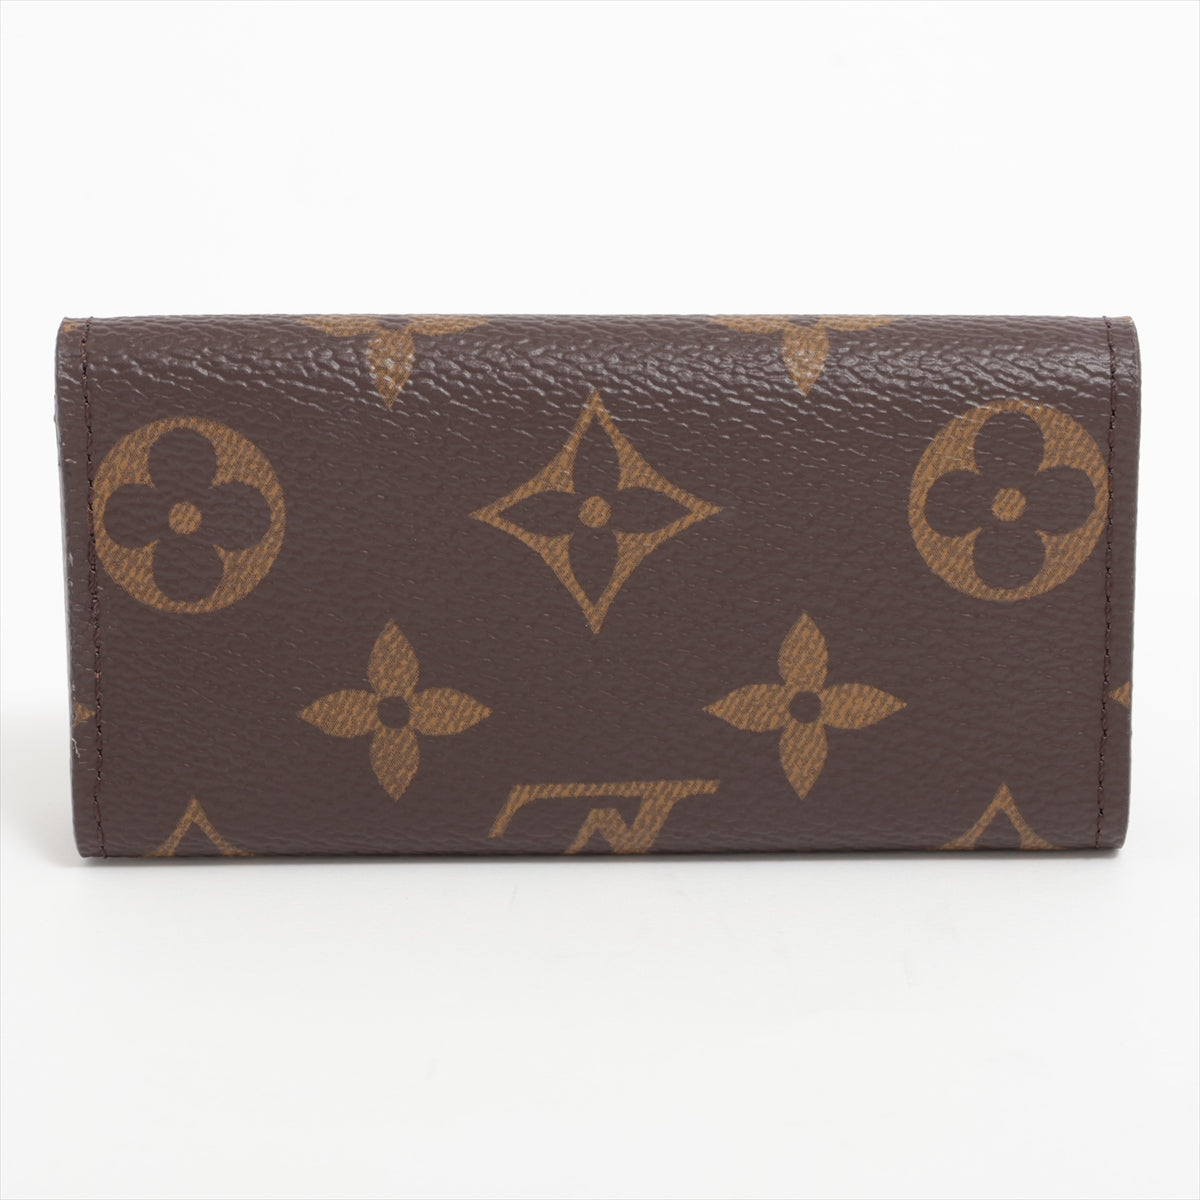 Louis Vuitton Monogram Multiclés 4 M69517 Brown Key Case There was an RFID response